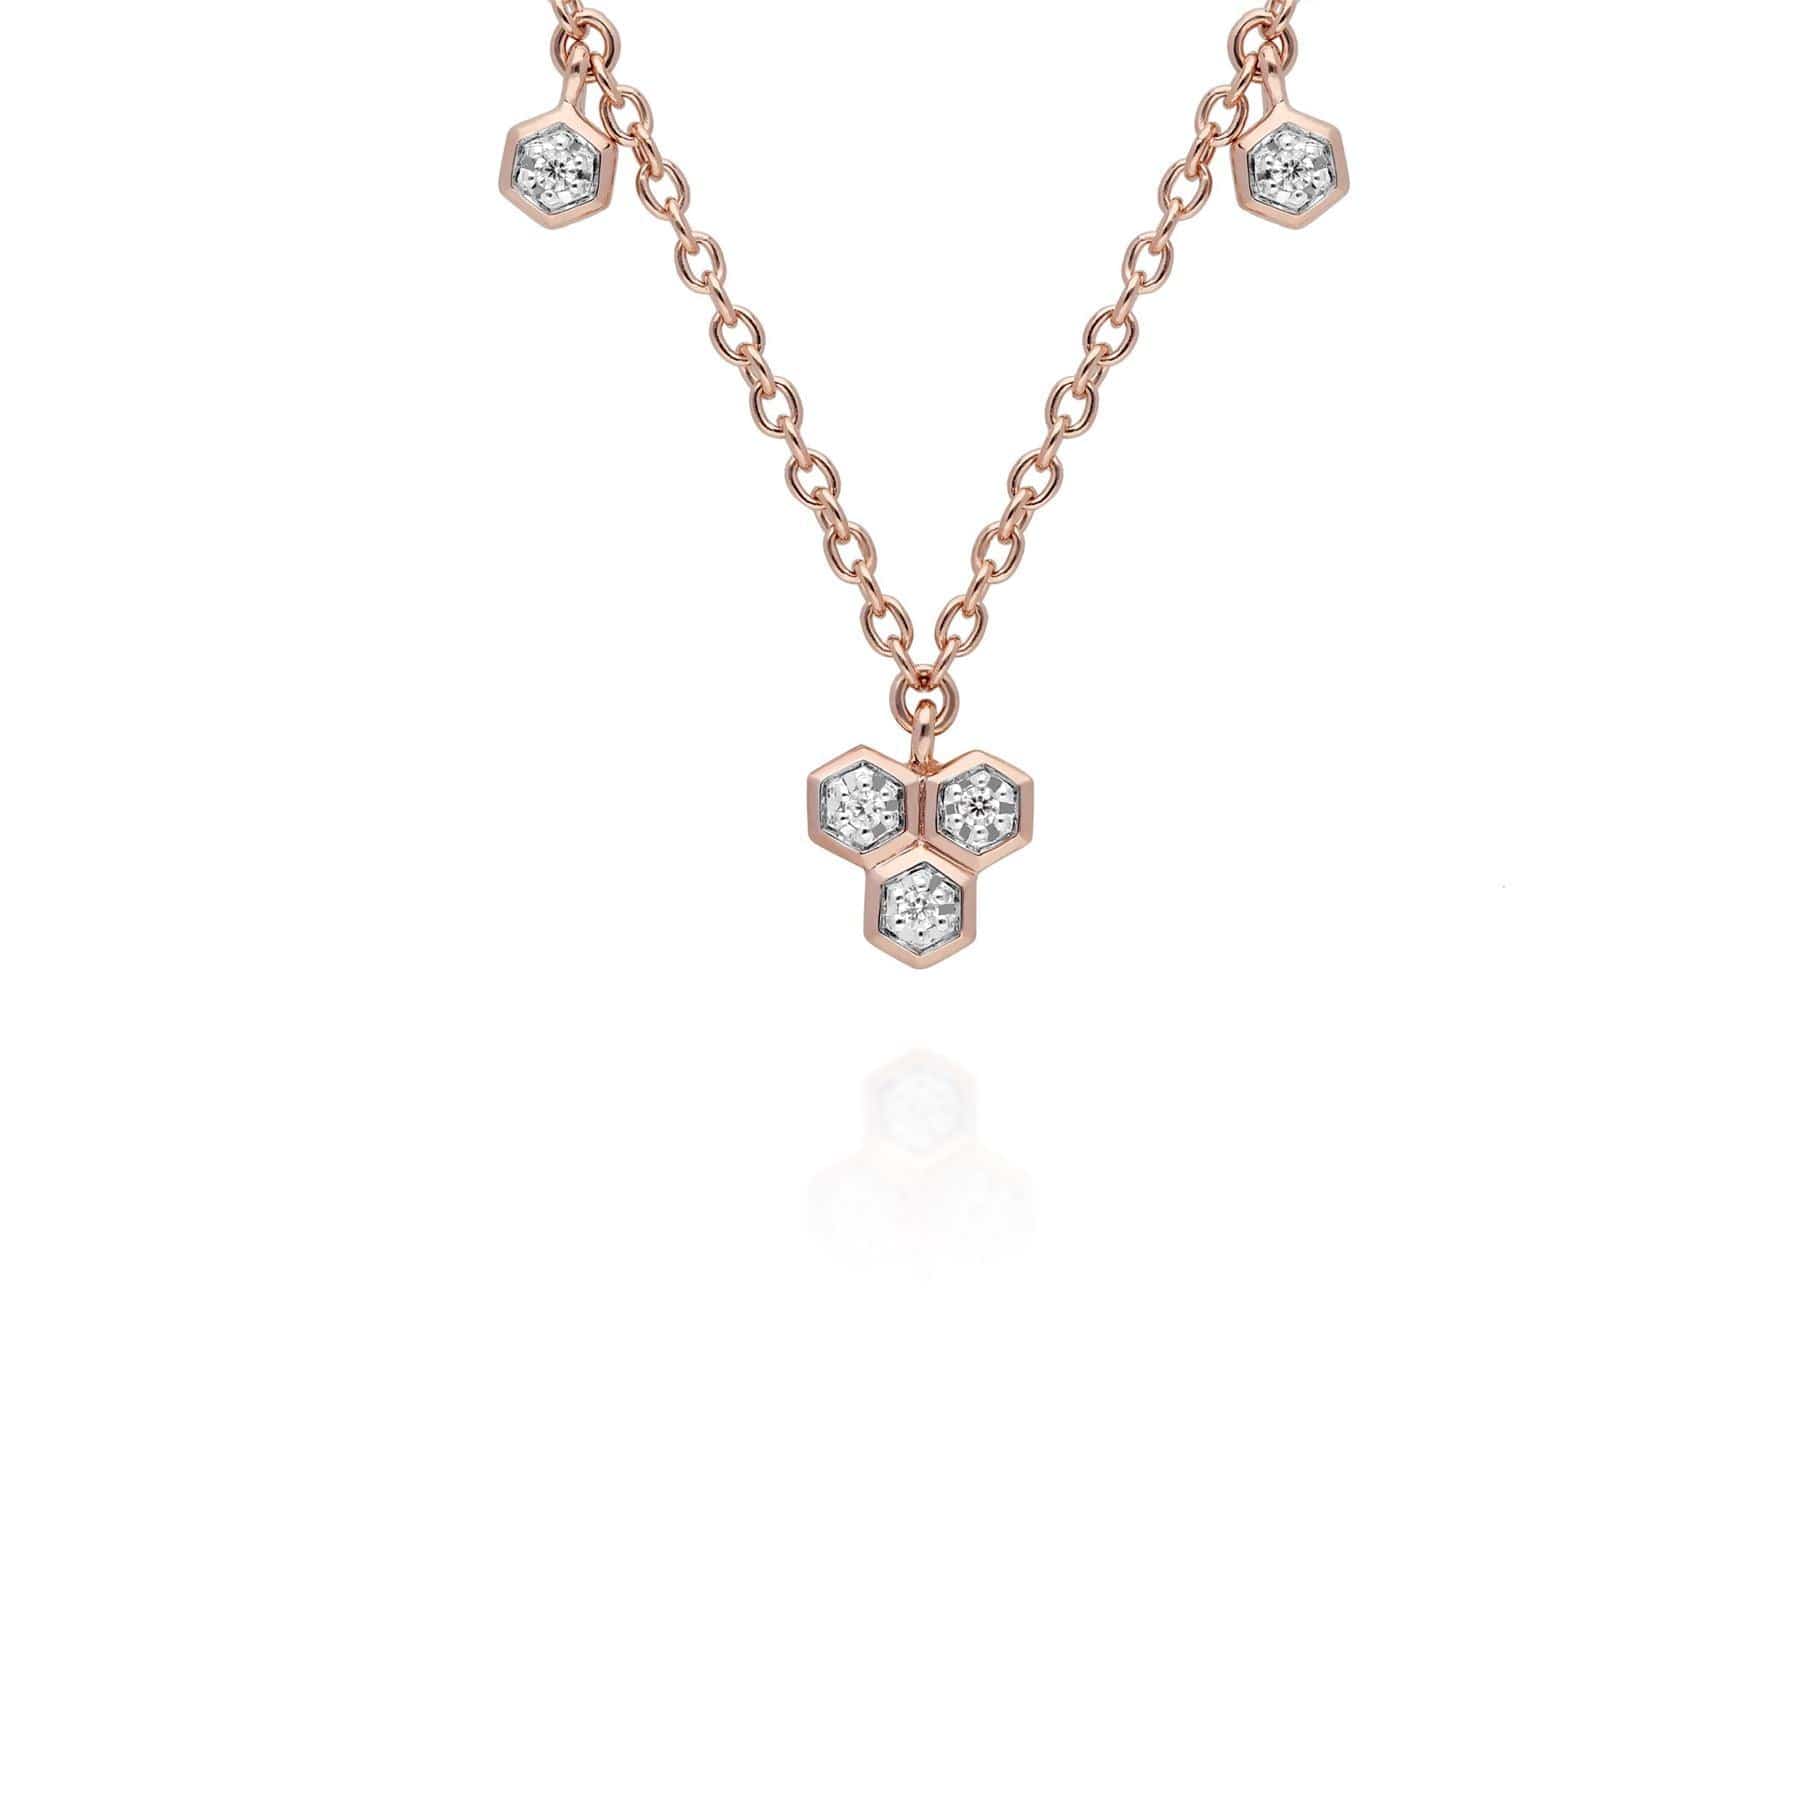 191N0227029-191R0901029 Diamond Trilogy Necklace & Ring Set in 9ct Rose Gold 2